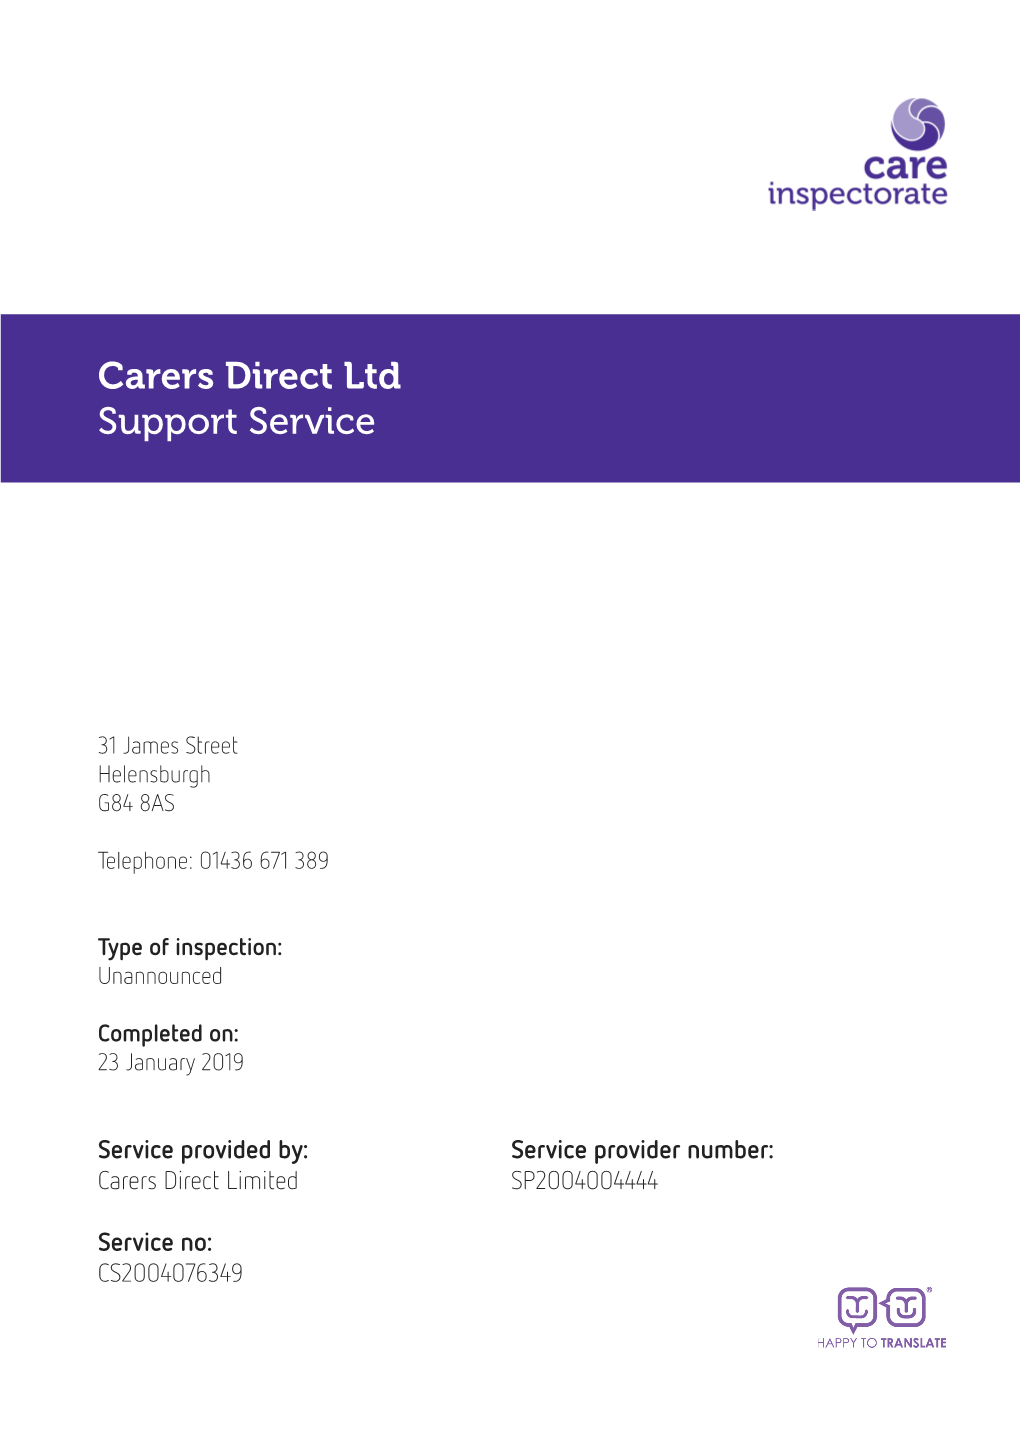 Carers Direct Ltd Support Service